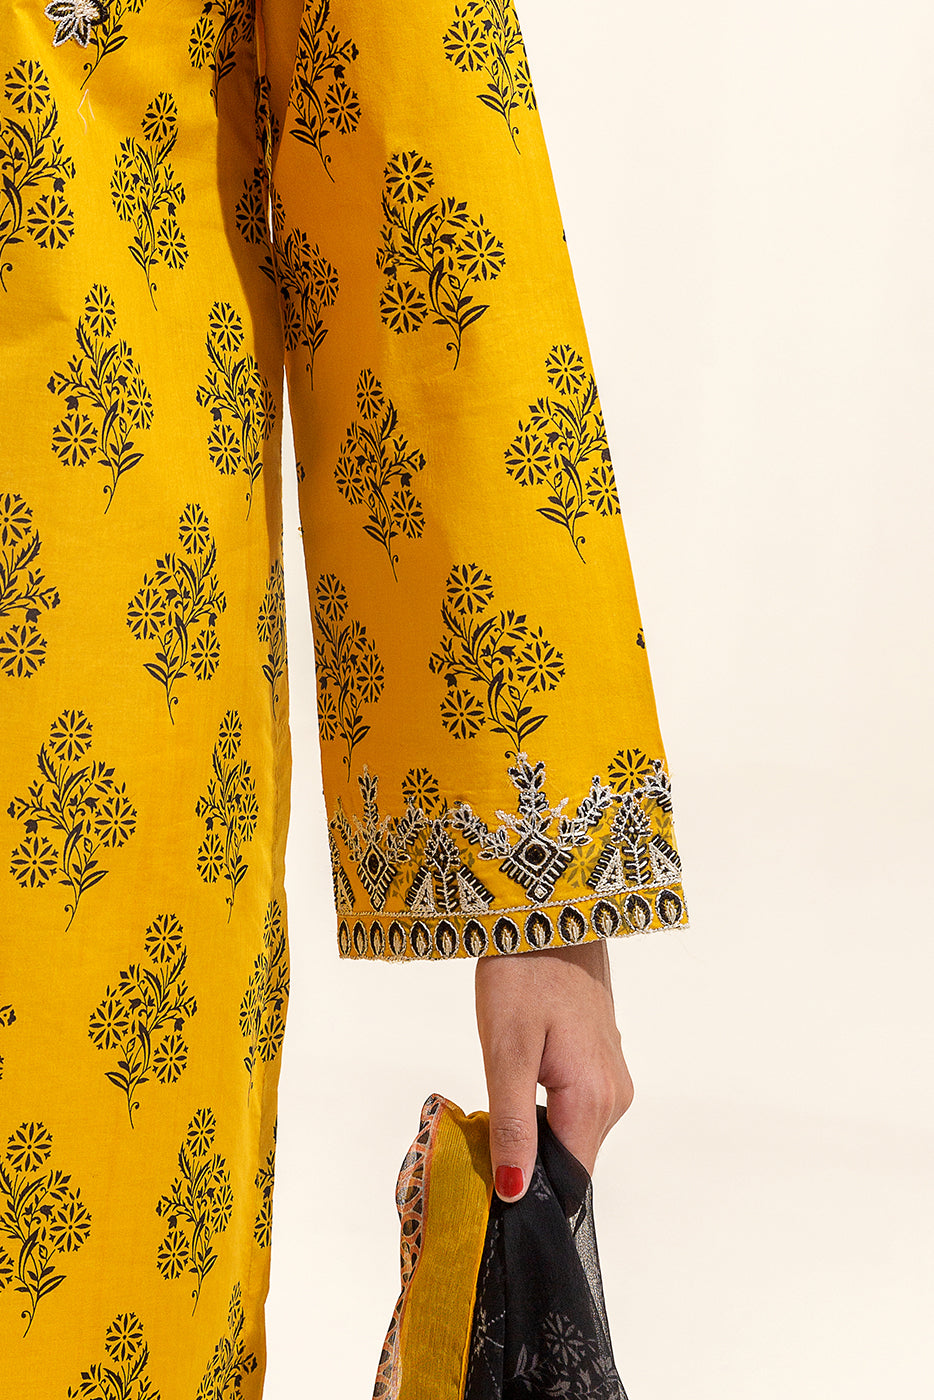 2 PIECE EMBROIDERED LAWN SUIT-HARVEST GOLD (UNSTITCHED)